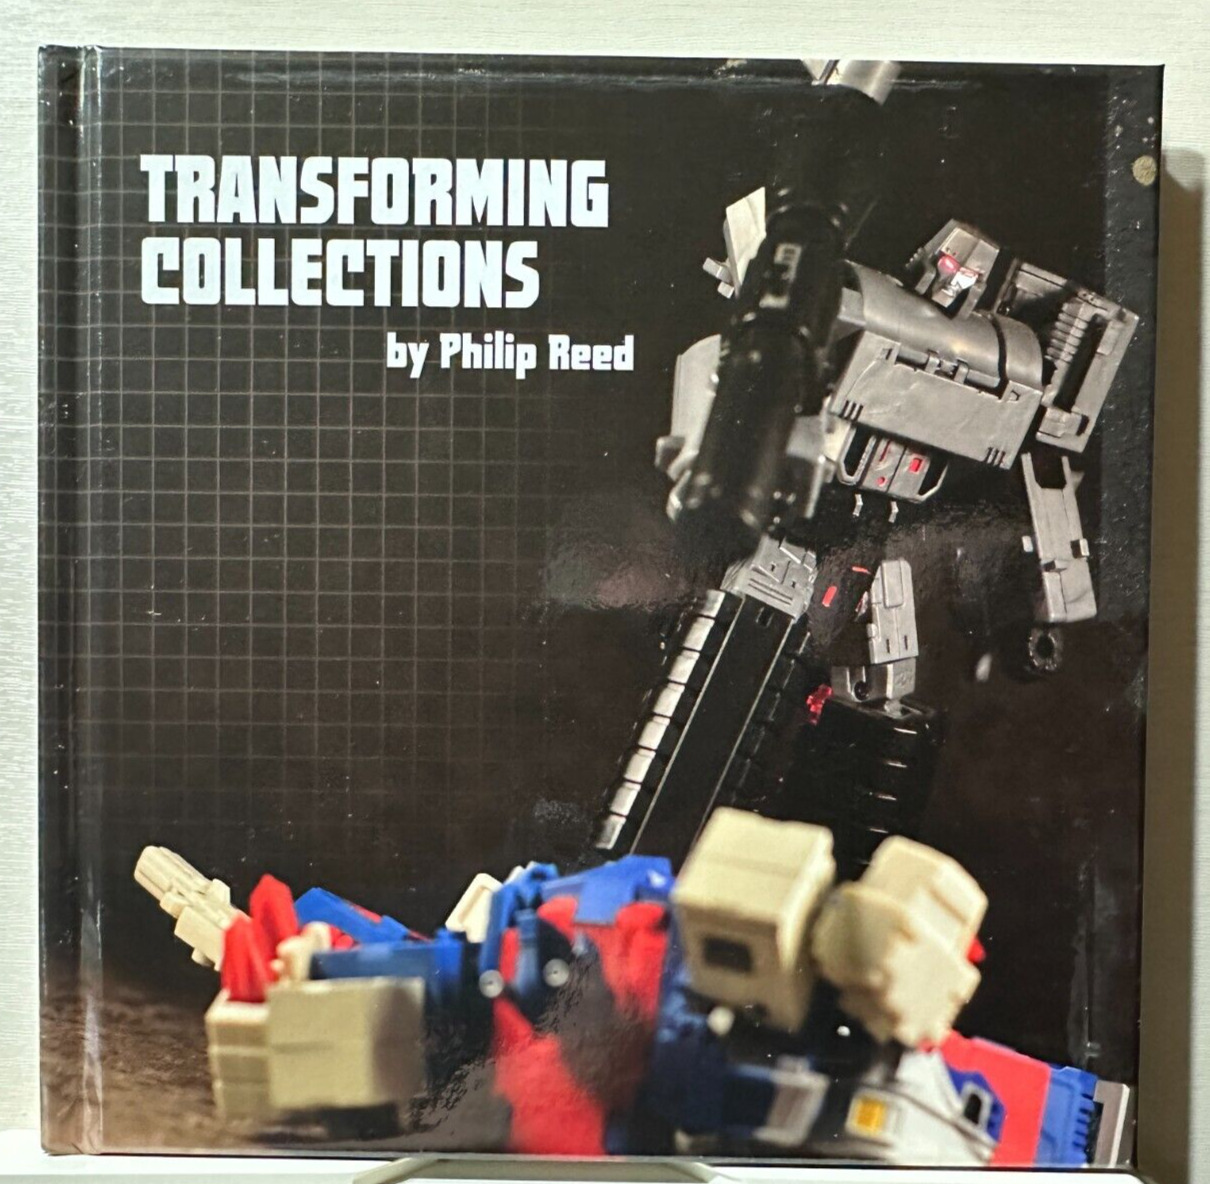 Transformers Third Party Toy Book - Transforming Collections by Philip Reed